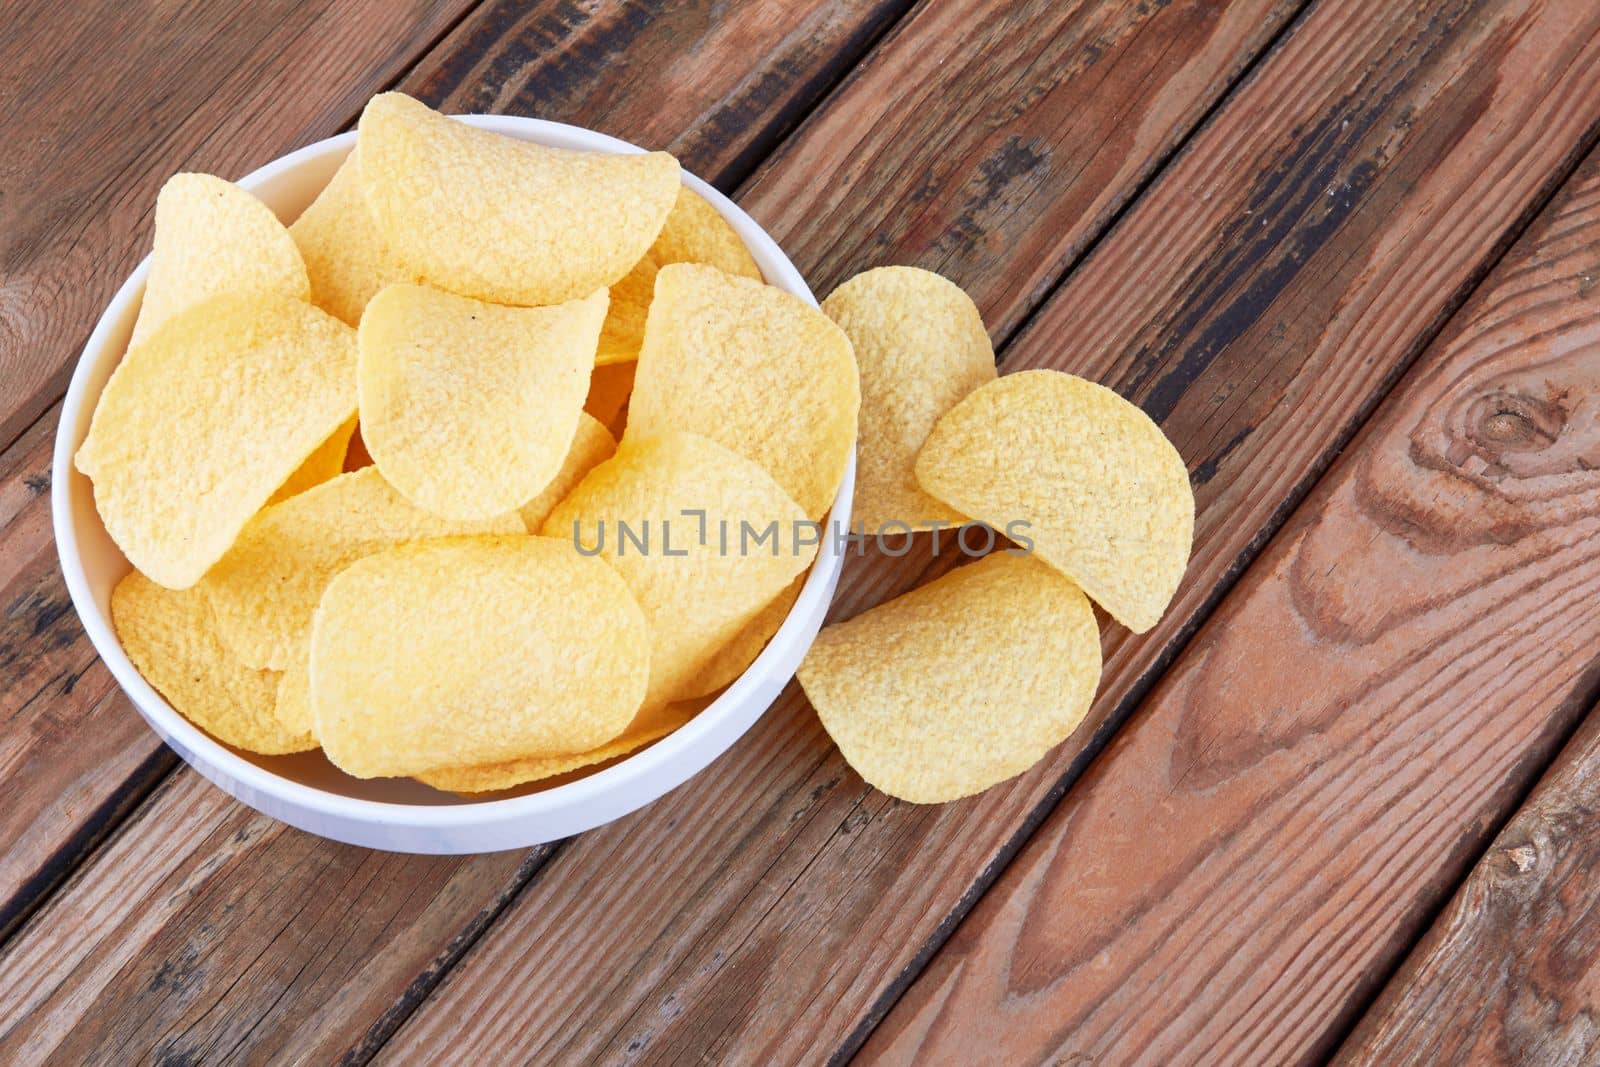 Potato chips on a wooden surface in a saucer